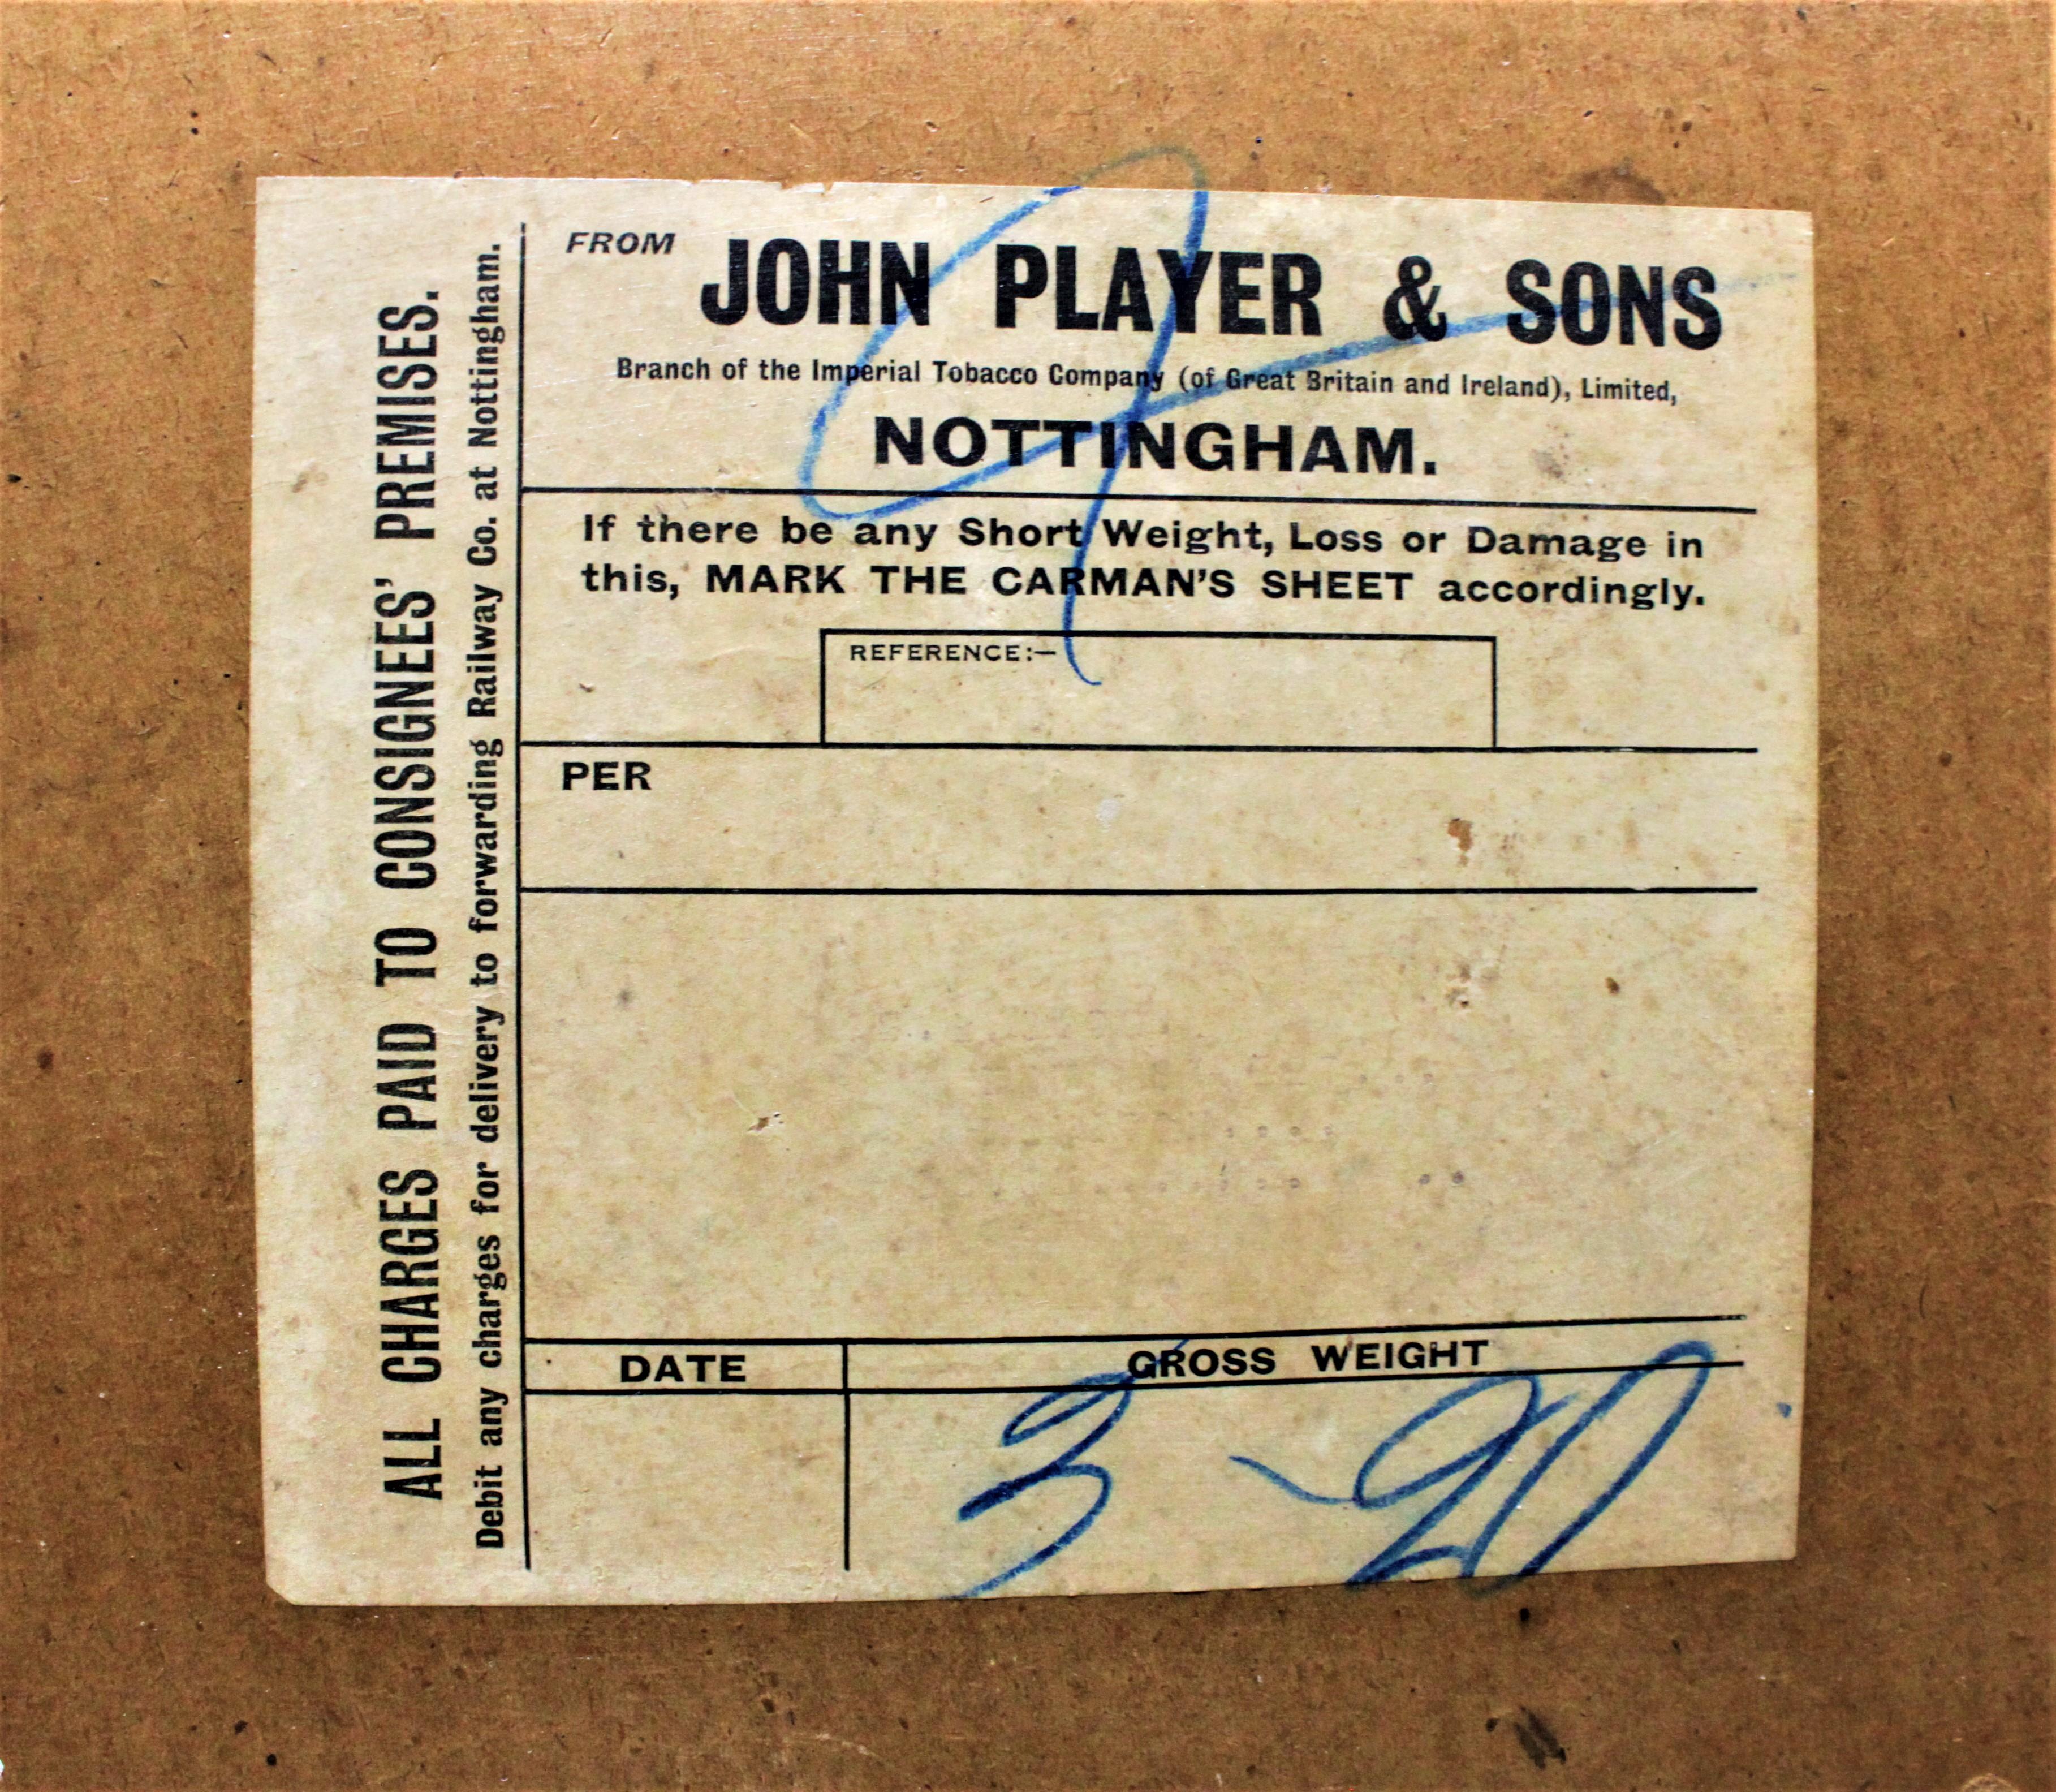 Vintage John Players Navy Cut Cigarette Advertising Shipping Crate or Box In Good Condition For Sale In Hamilton, Ontario